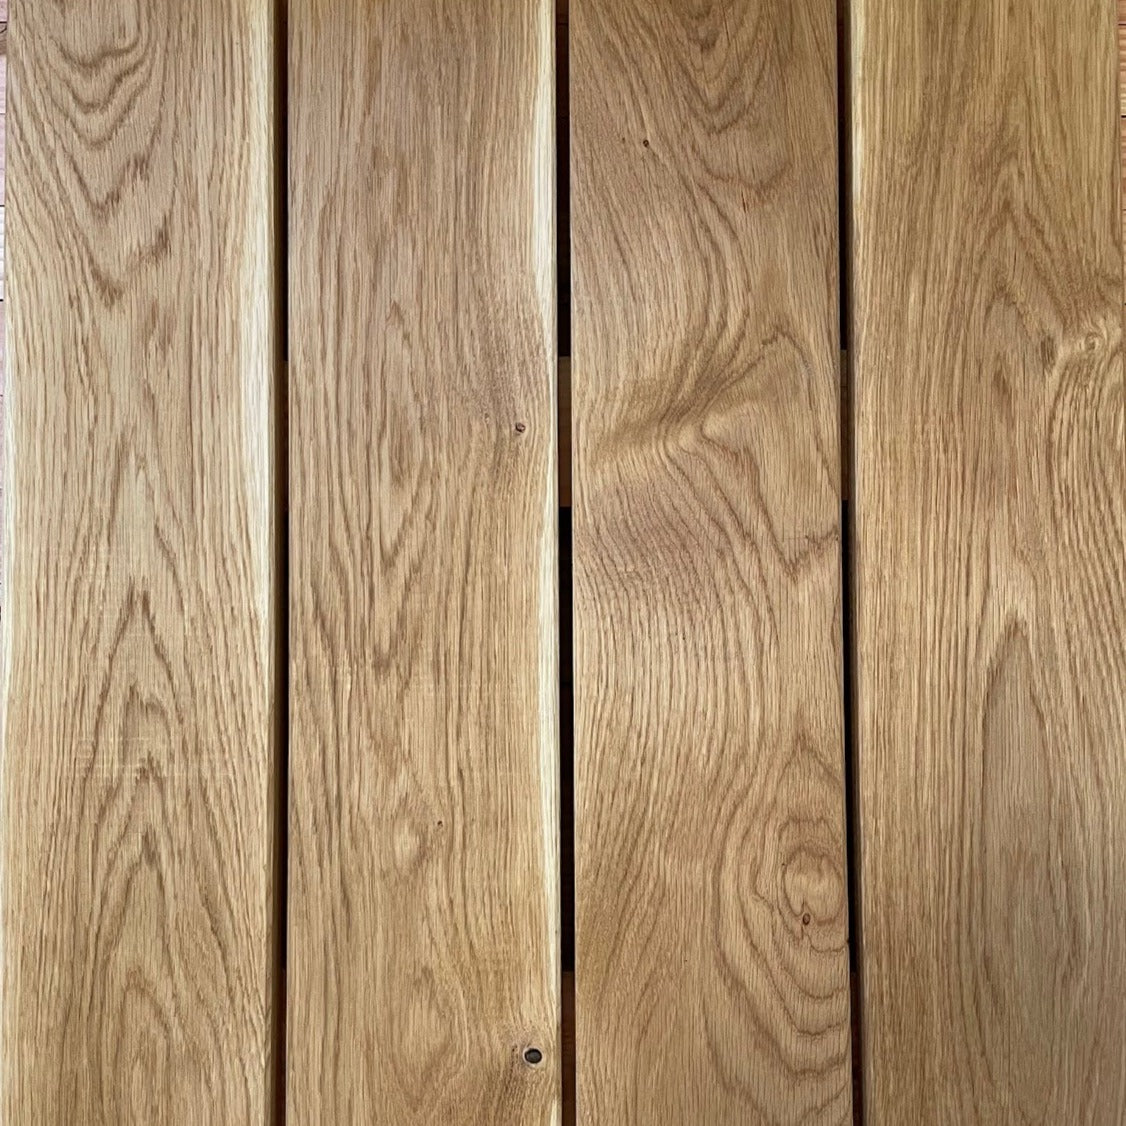 OAK DECKING BOARDS SMOOTH FINISH - A GRADE – 22mm thick x 120mm - Various Lengths